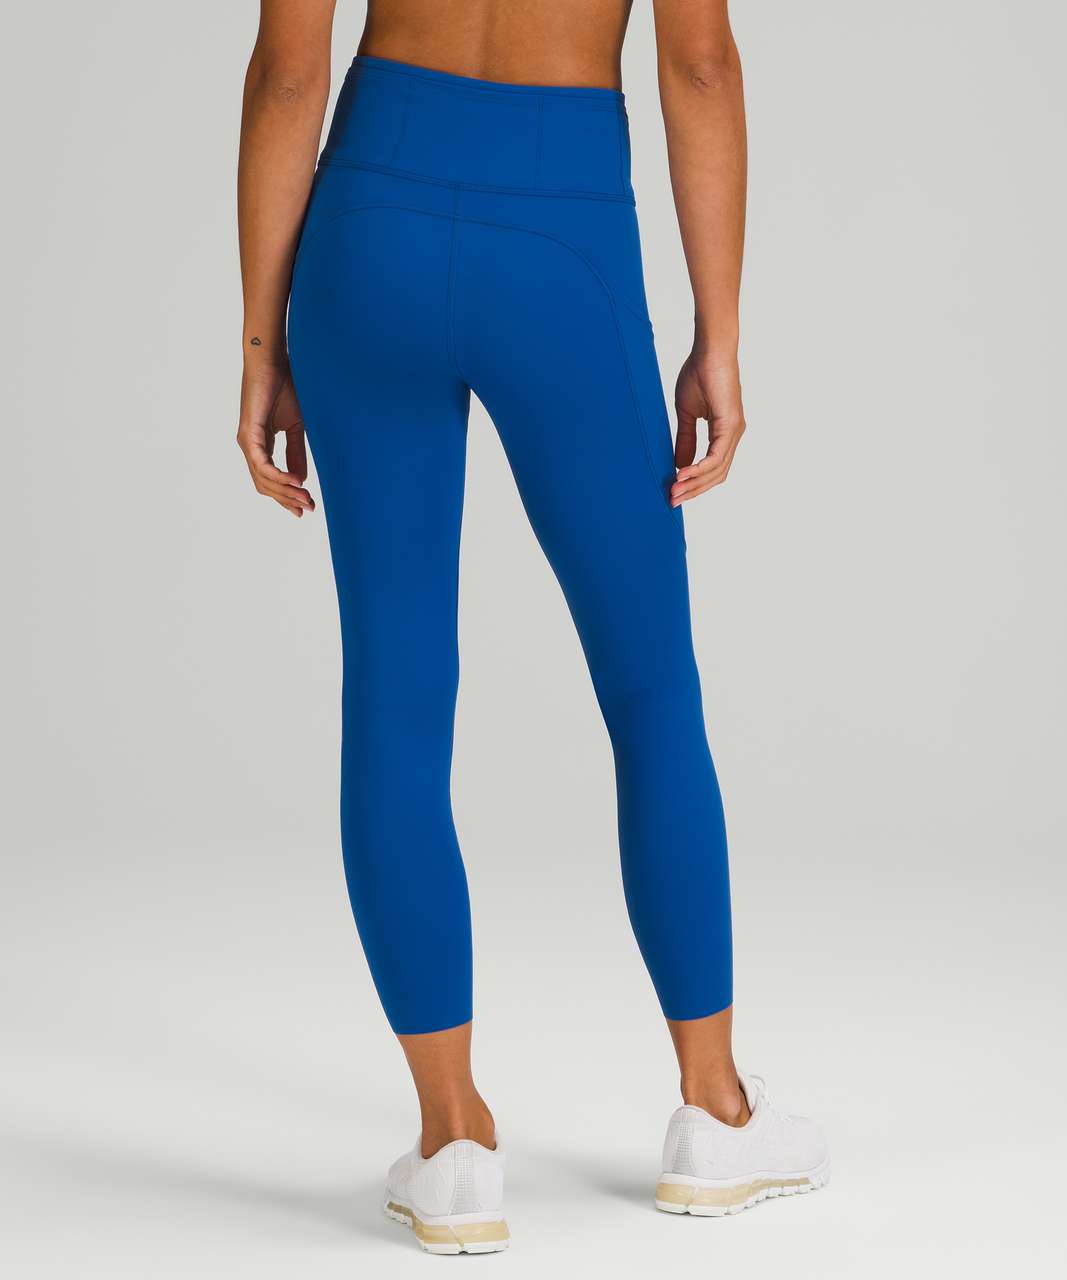 Lululemon Fast and Free High-Rise Tight 25 *Nulux - Symphony Blue